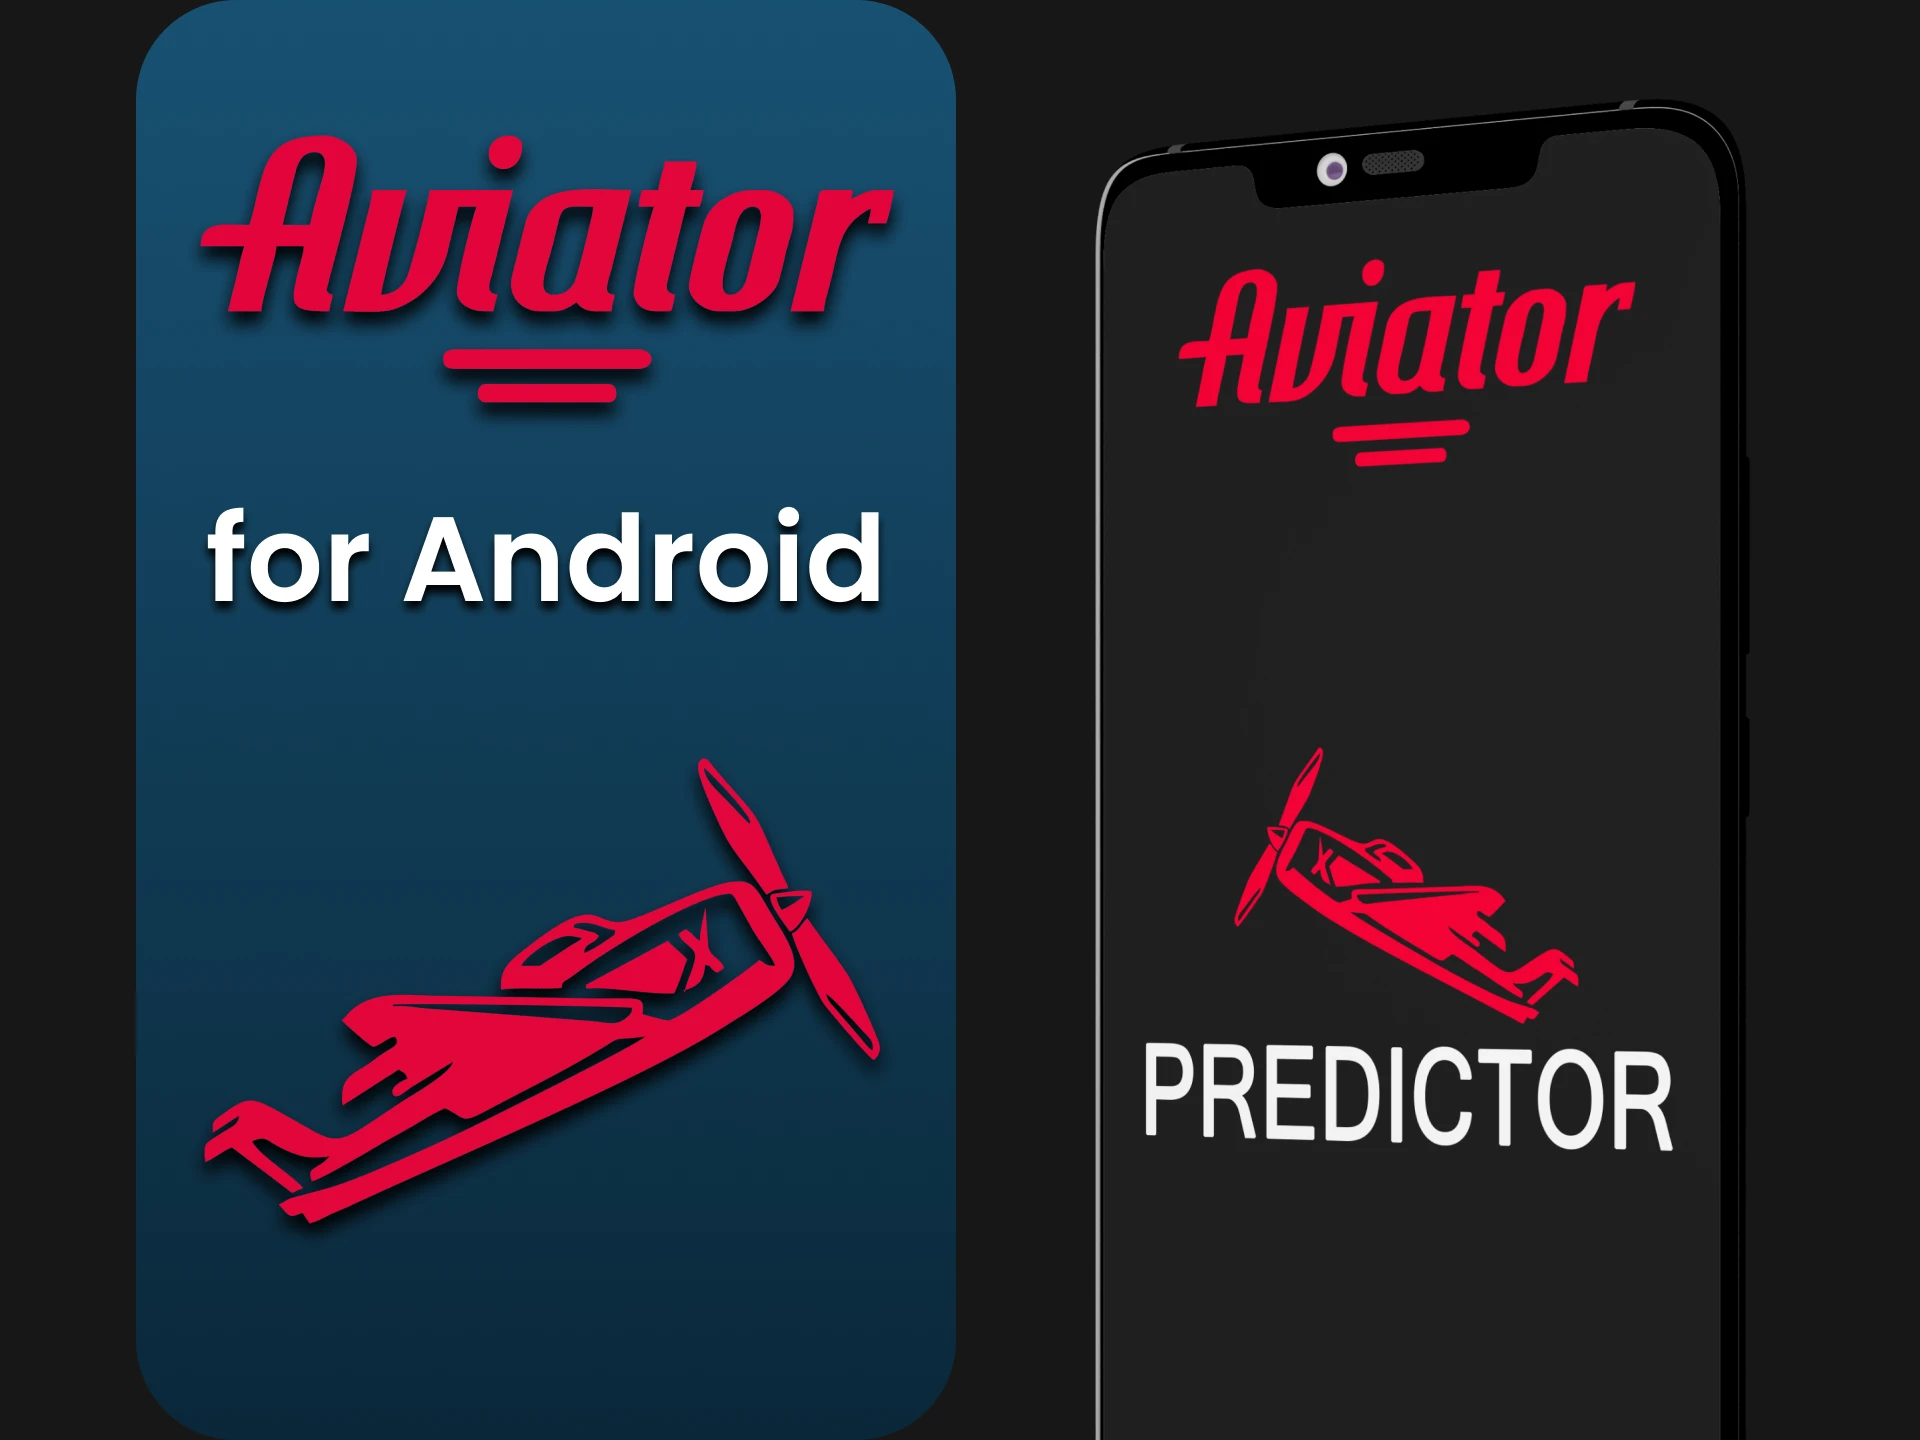 We will show you how to install Predictor for Android.